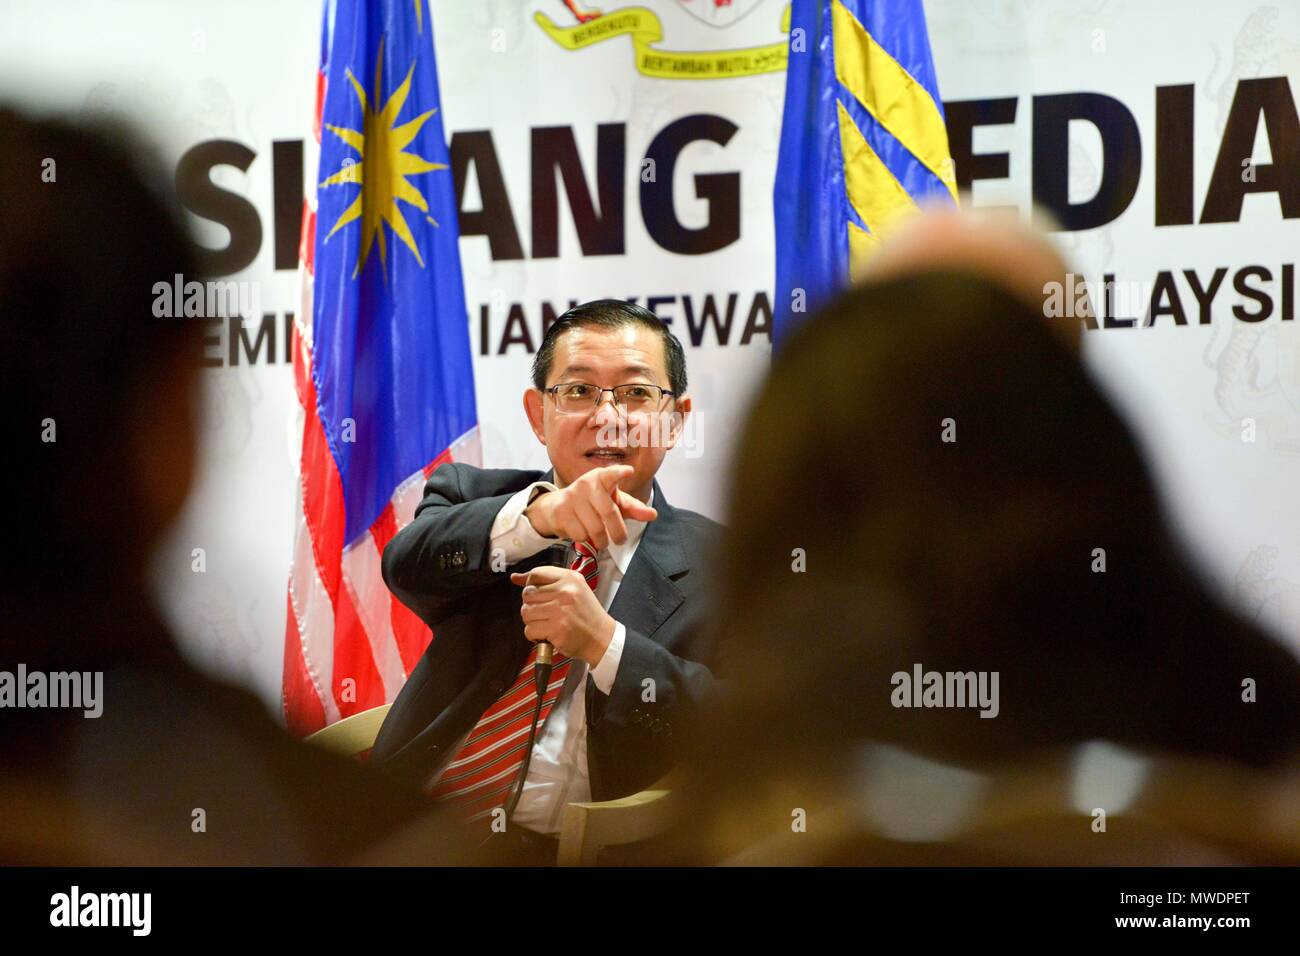 Putrajaya, Malaysia. 1st June, 2018. Malaysian Finance Minister Lim Guan Eng speaks during a briefing with foreign media at the Ministry of Finance in Putrajaya, Malaysia, June 1, 2018. Malaysian Finance Minister Lim Guan Eng said on Friday that terminating the high speed rail (HSR) link between Kuala Lumpur and Singapore does not mean it cannot be revisited in the future, days after Prime Minister Mahathir Mohamad axed the project citing high debt level. Credit: Chong Voon Chung/Xinhua/Alamy Live News Stock Photo